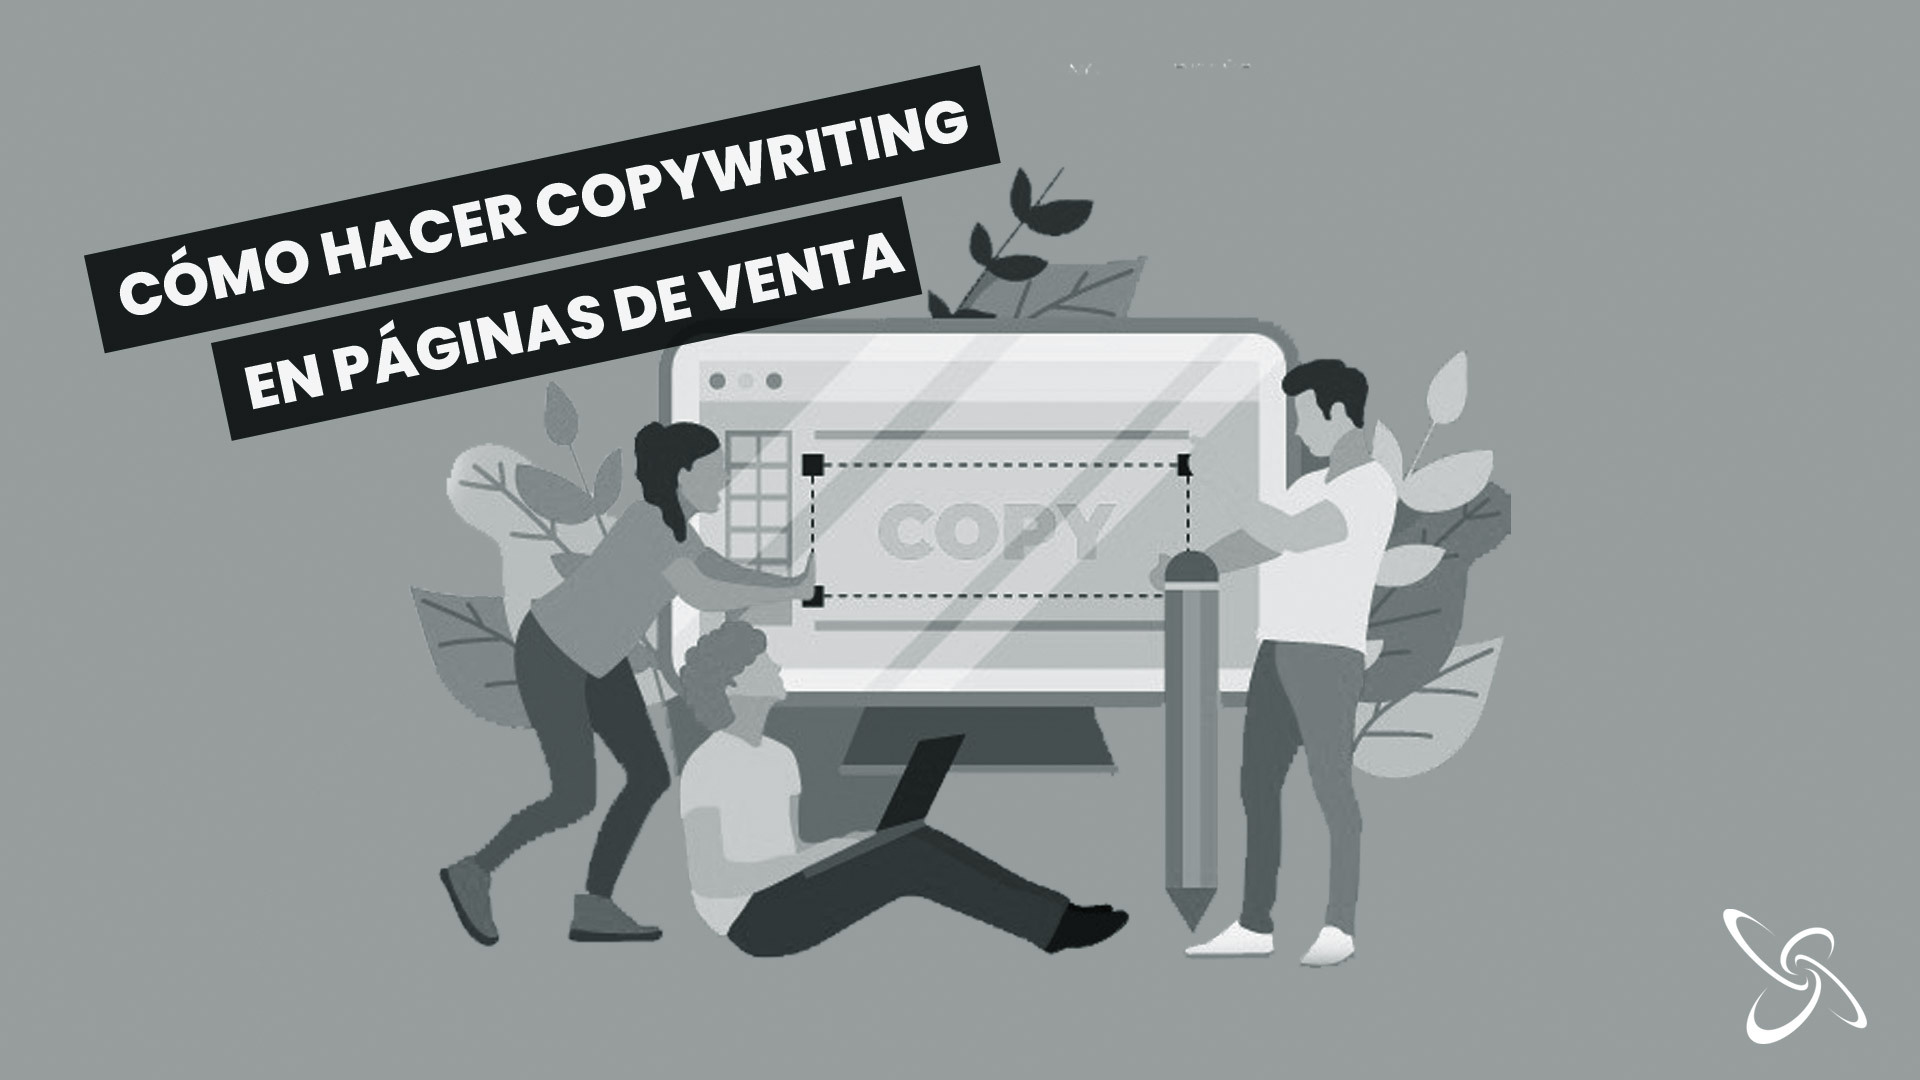 How to copywriting on sales pages